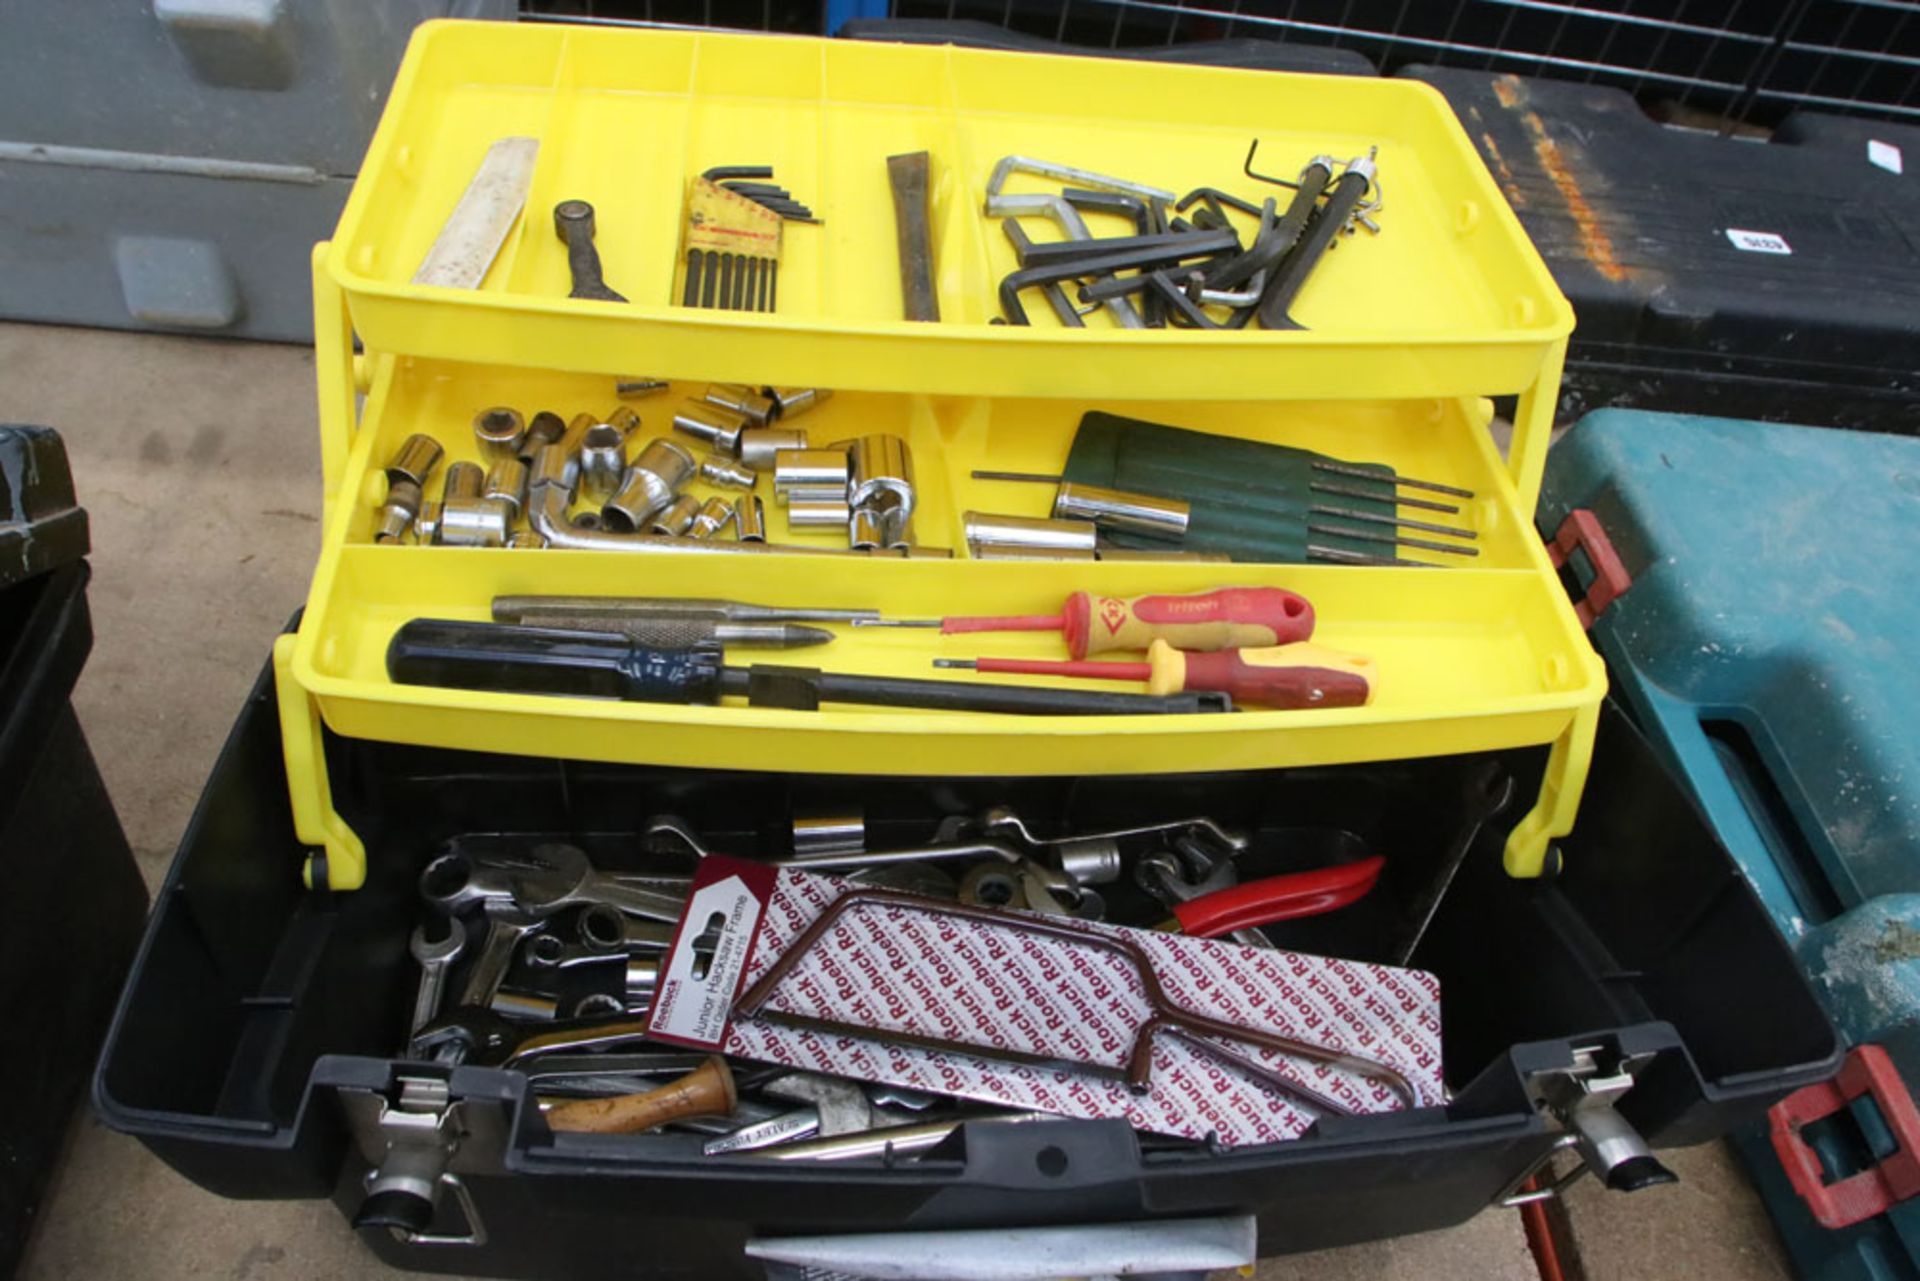 Stanley black and yellow tool box with a small quantity of spanners and allen keys